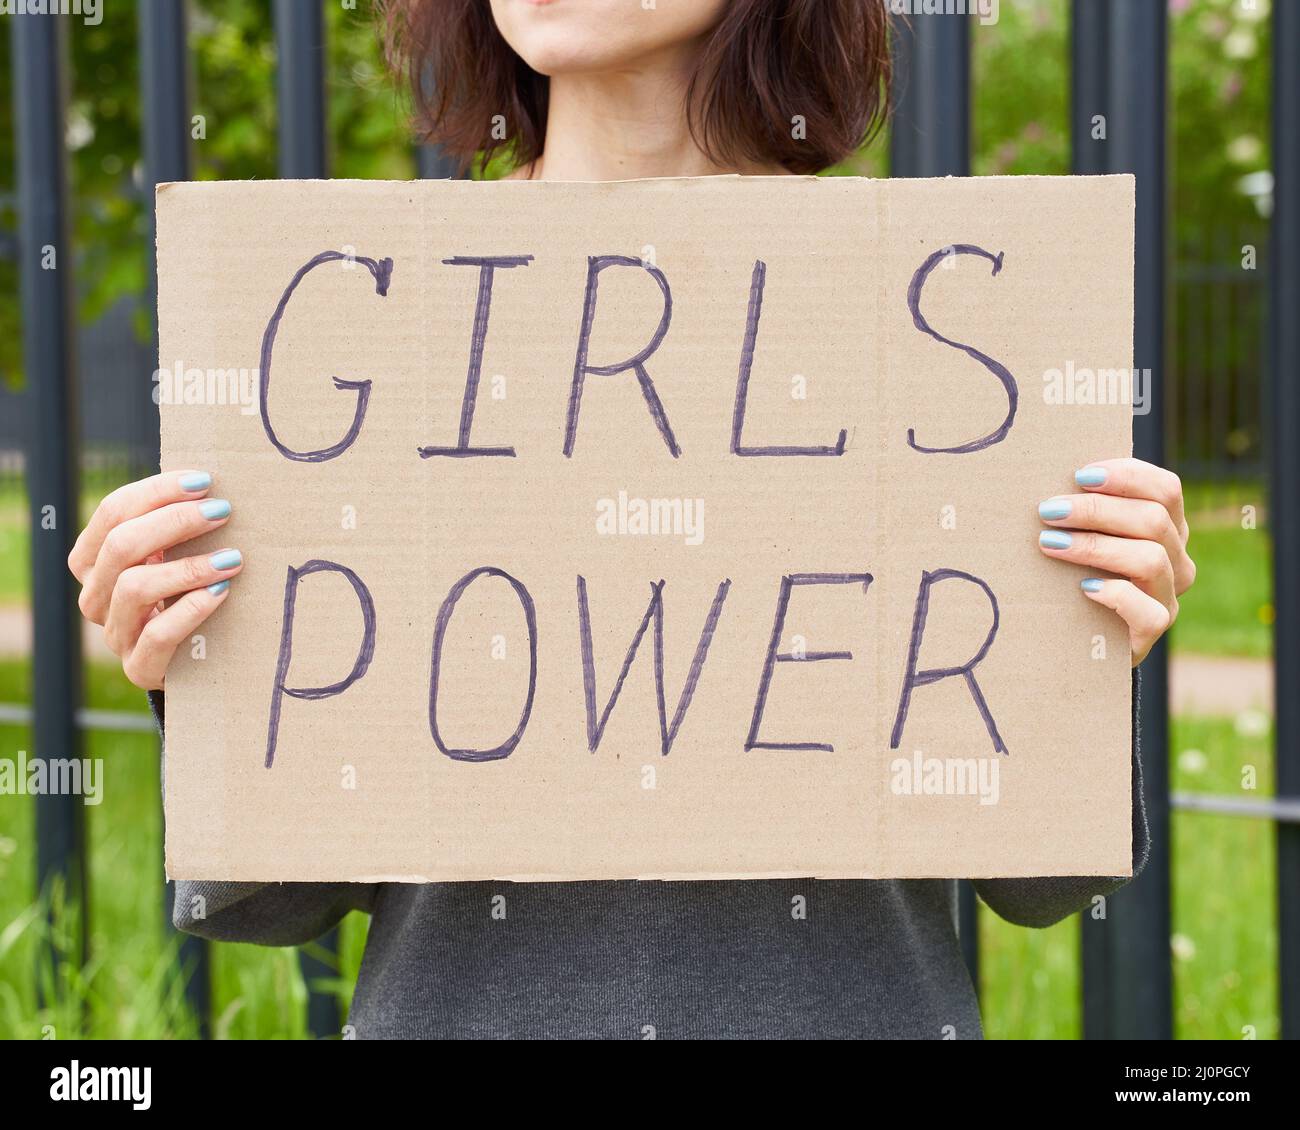 Girl Power concept. Unrecognizable person holds sign with text about feminism Stock Photo